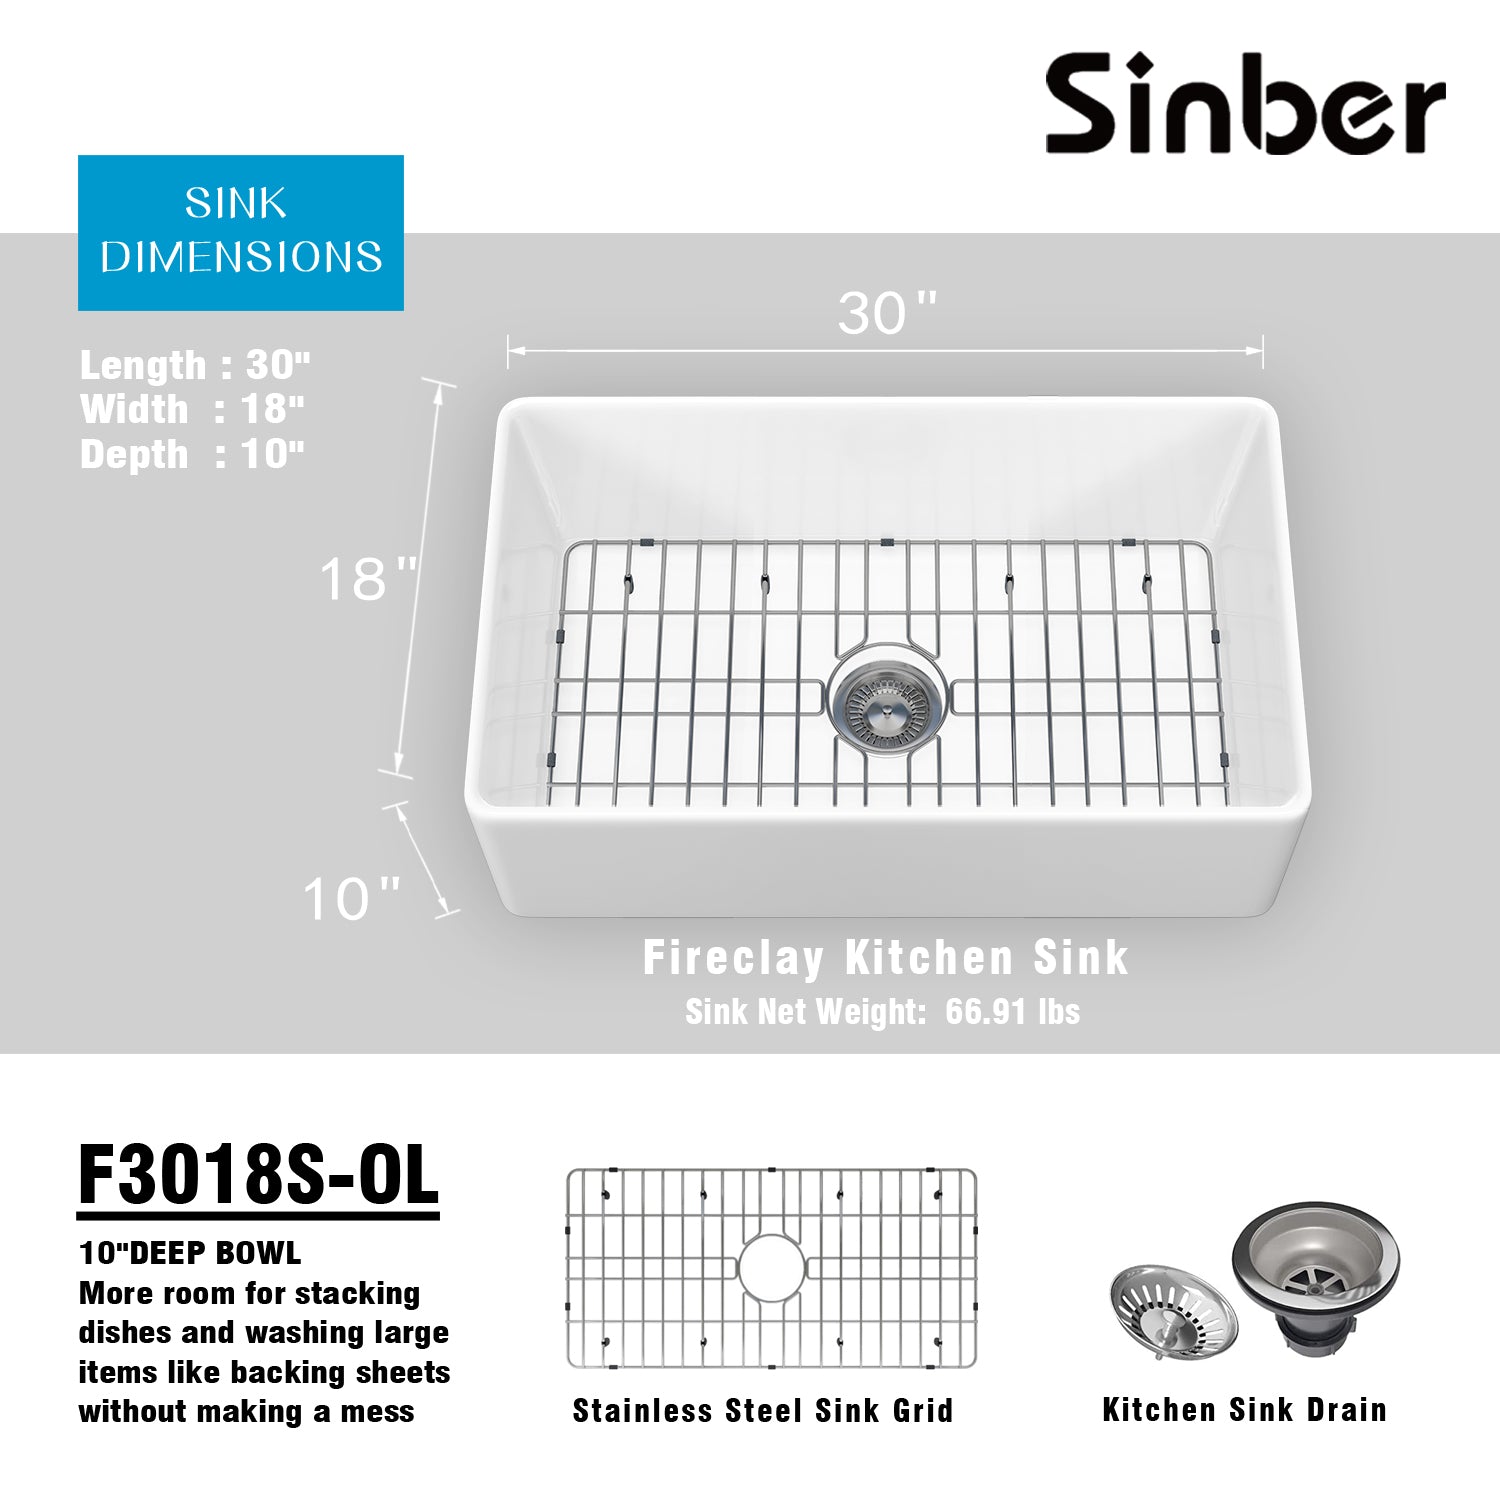 Sinber 30 Inch Farmhouse Apron Single Bowl Kitchen Sink with Fireclay White Finish 2 Accessories F3018S-OL